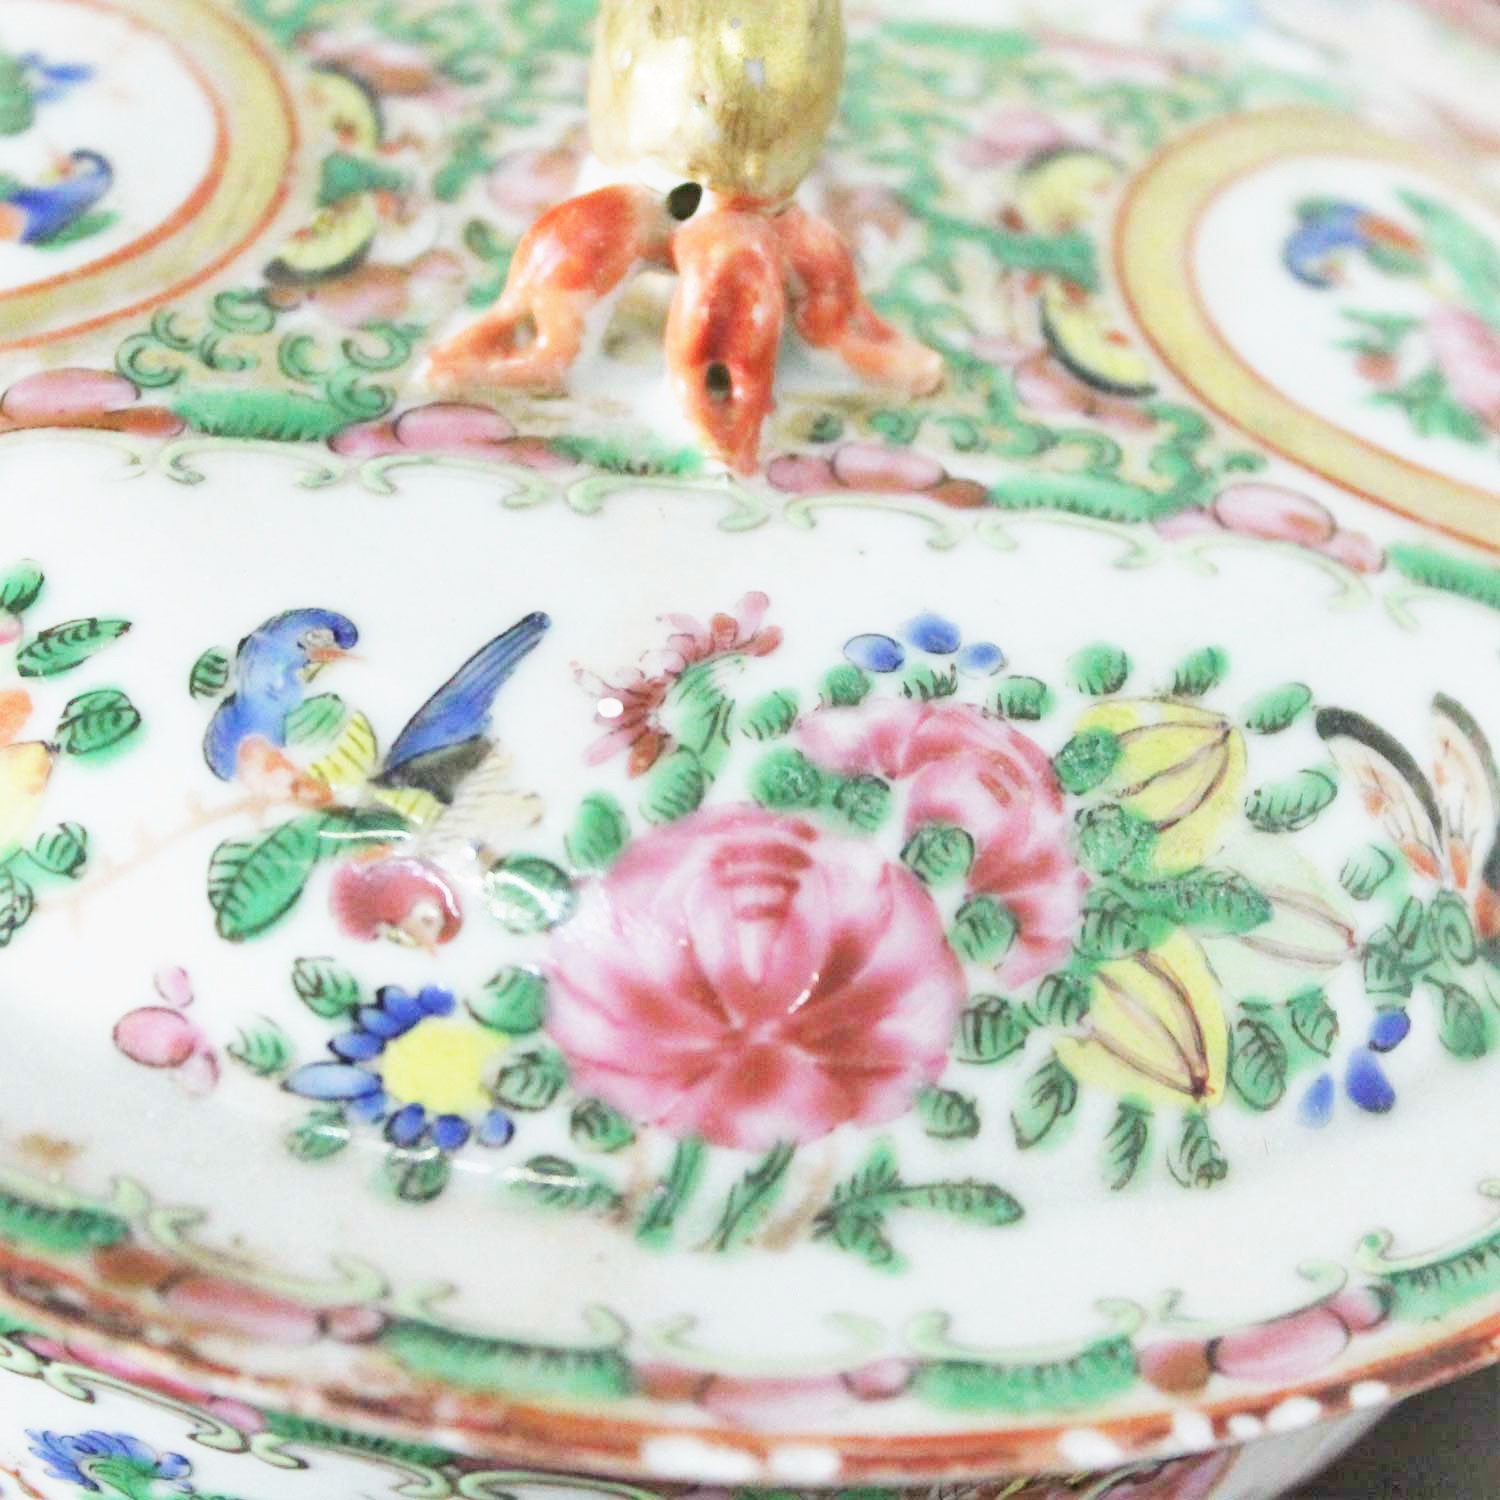 Antique Chinese Qing Rose Medallion Porcelain Covered Double Handled Bowl and Spoon